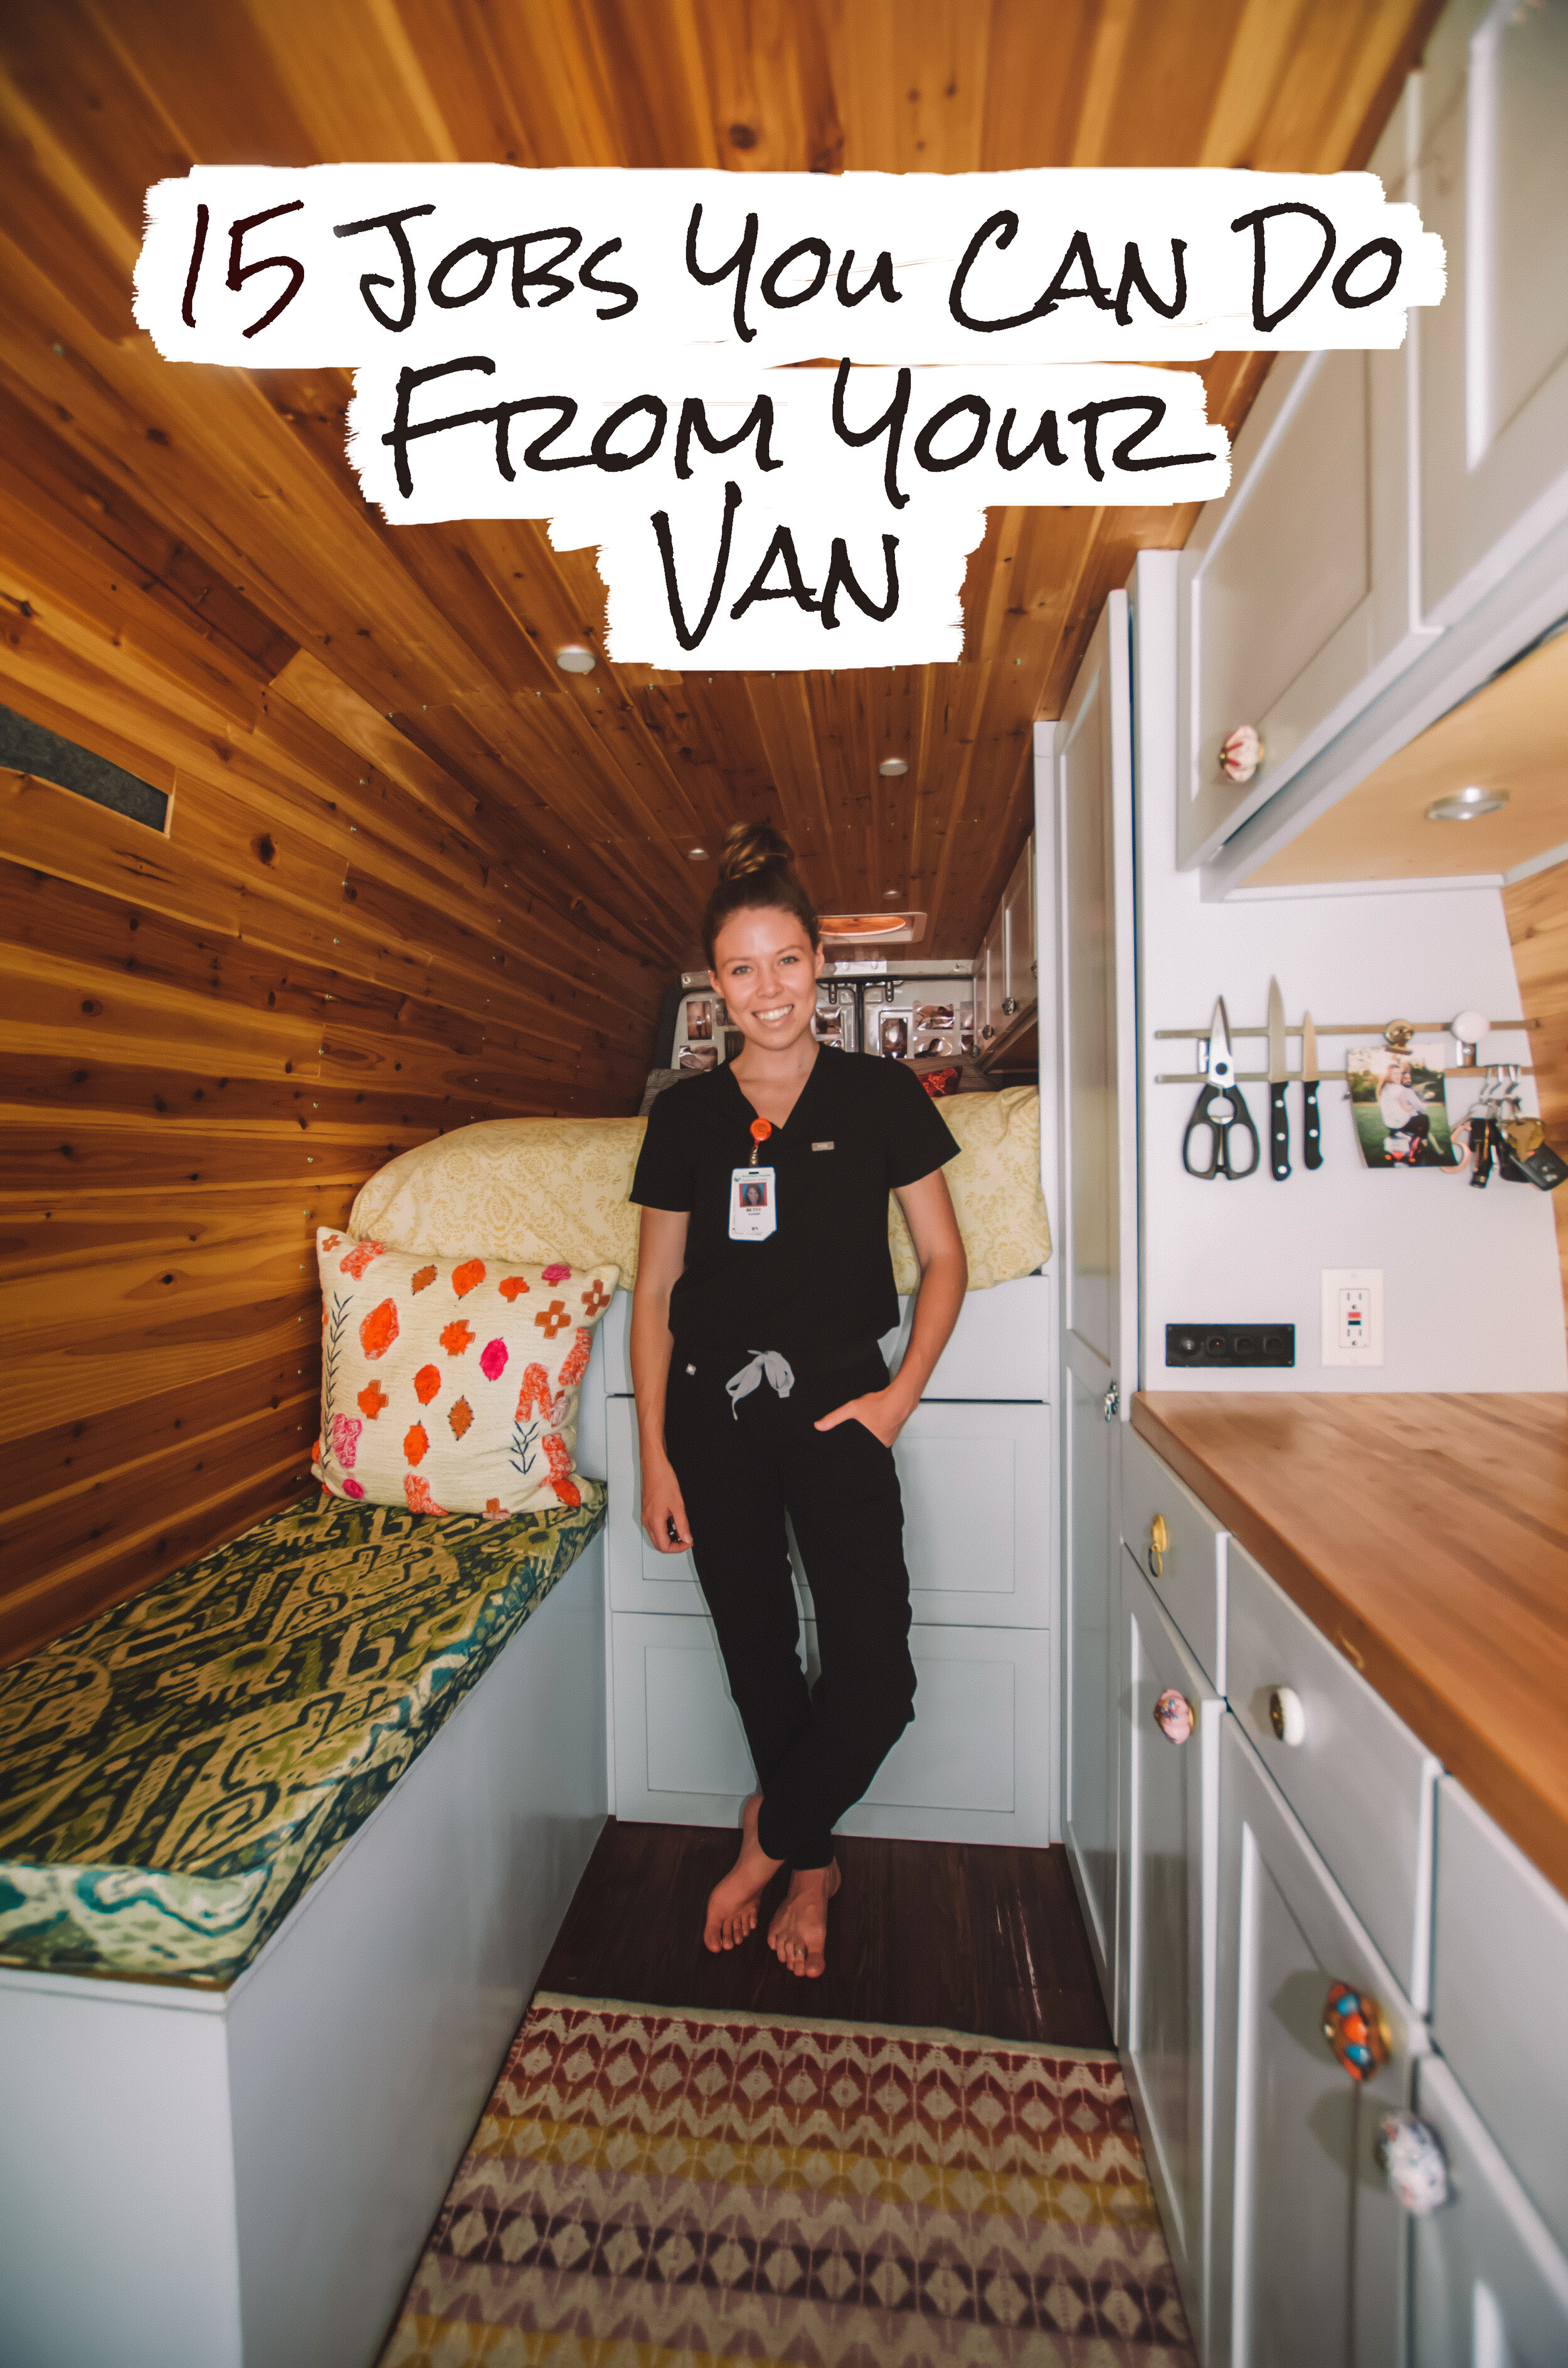 Fifteen Jobs You Can Do From Your Van 